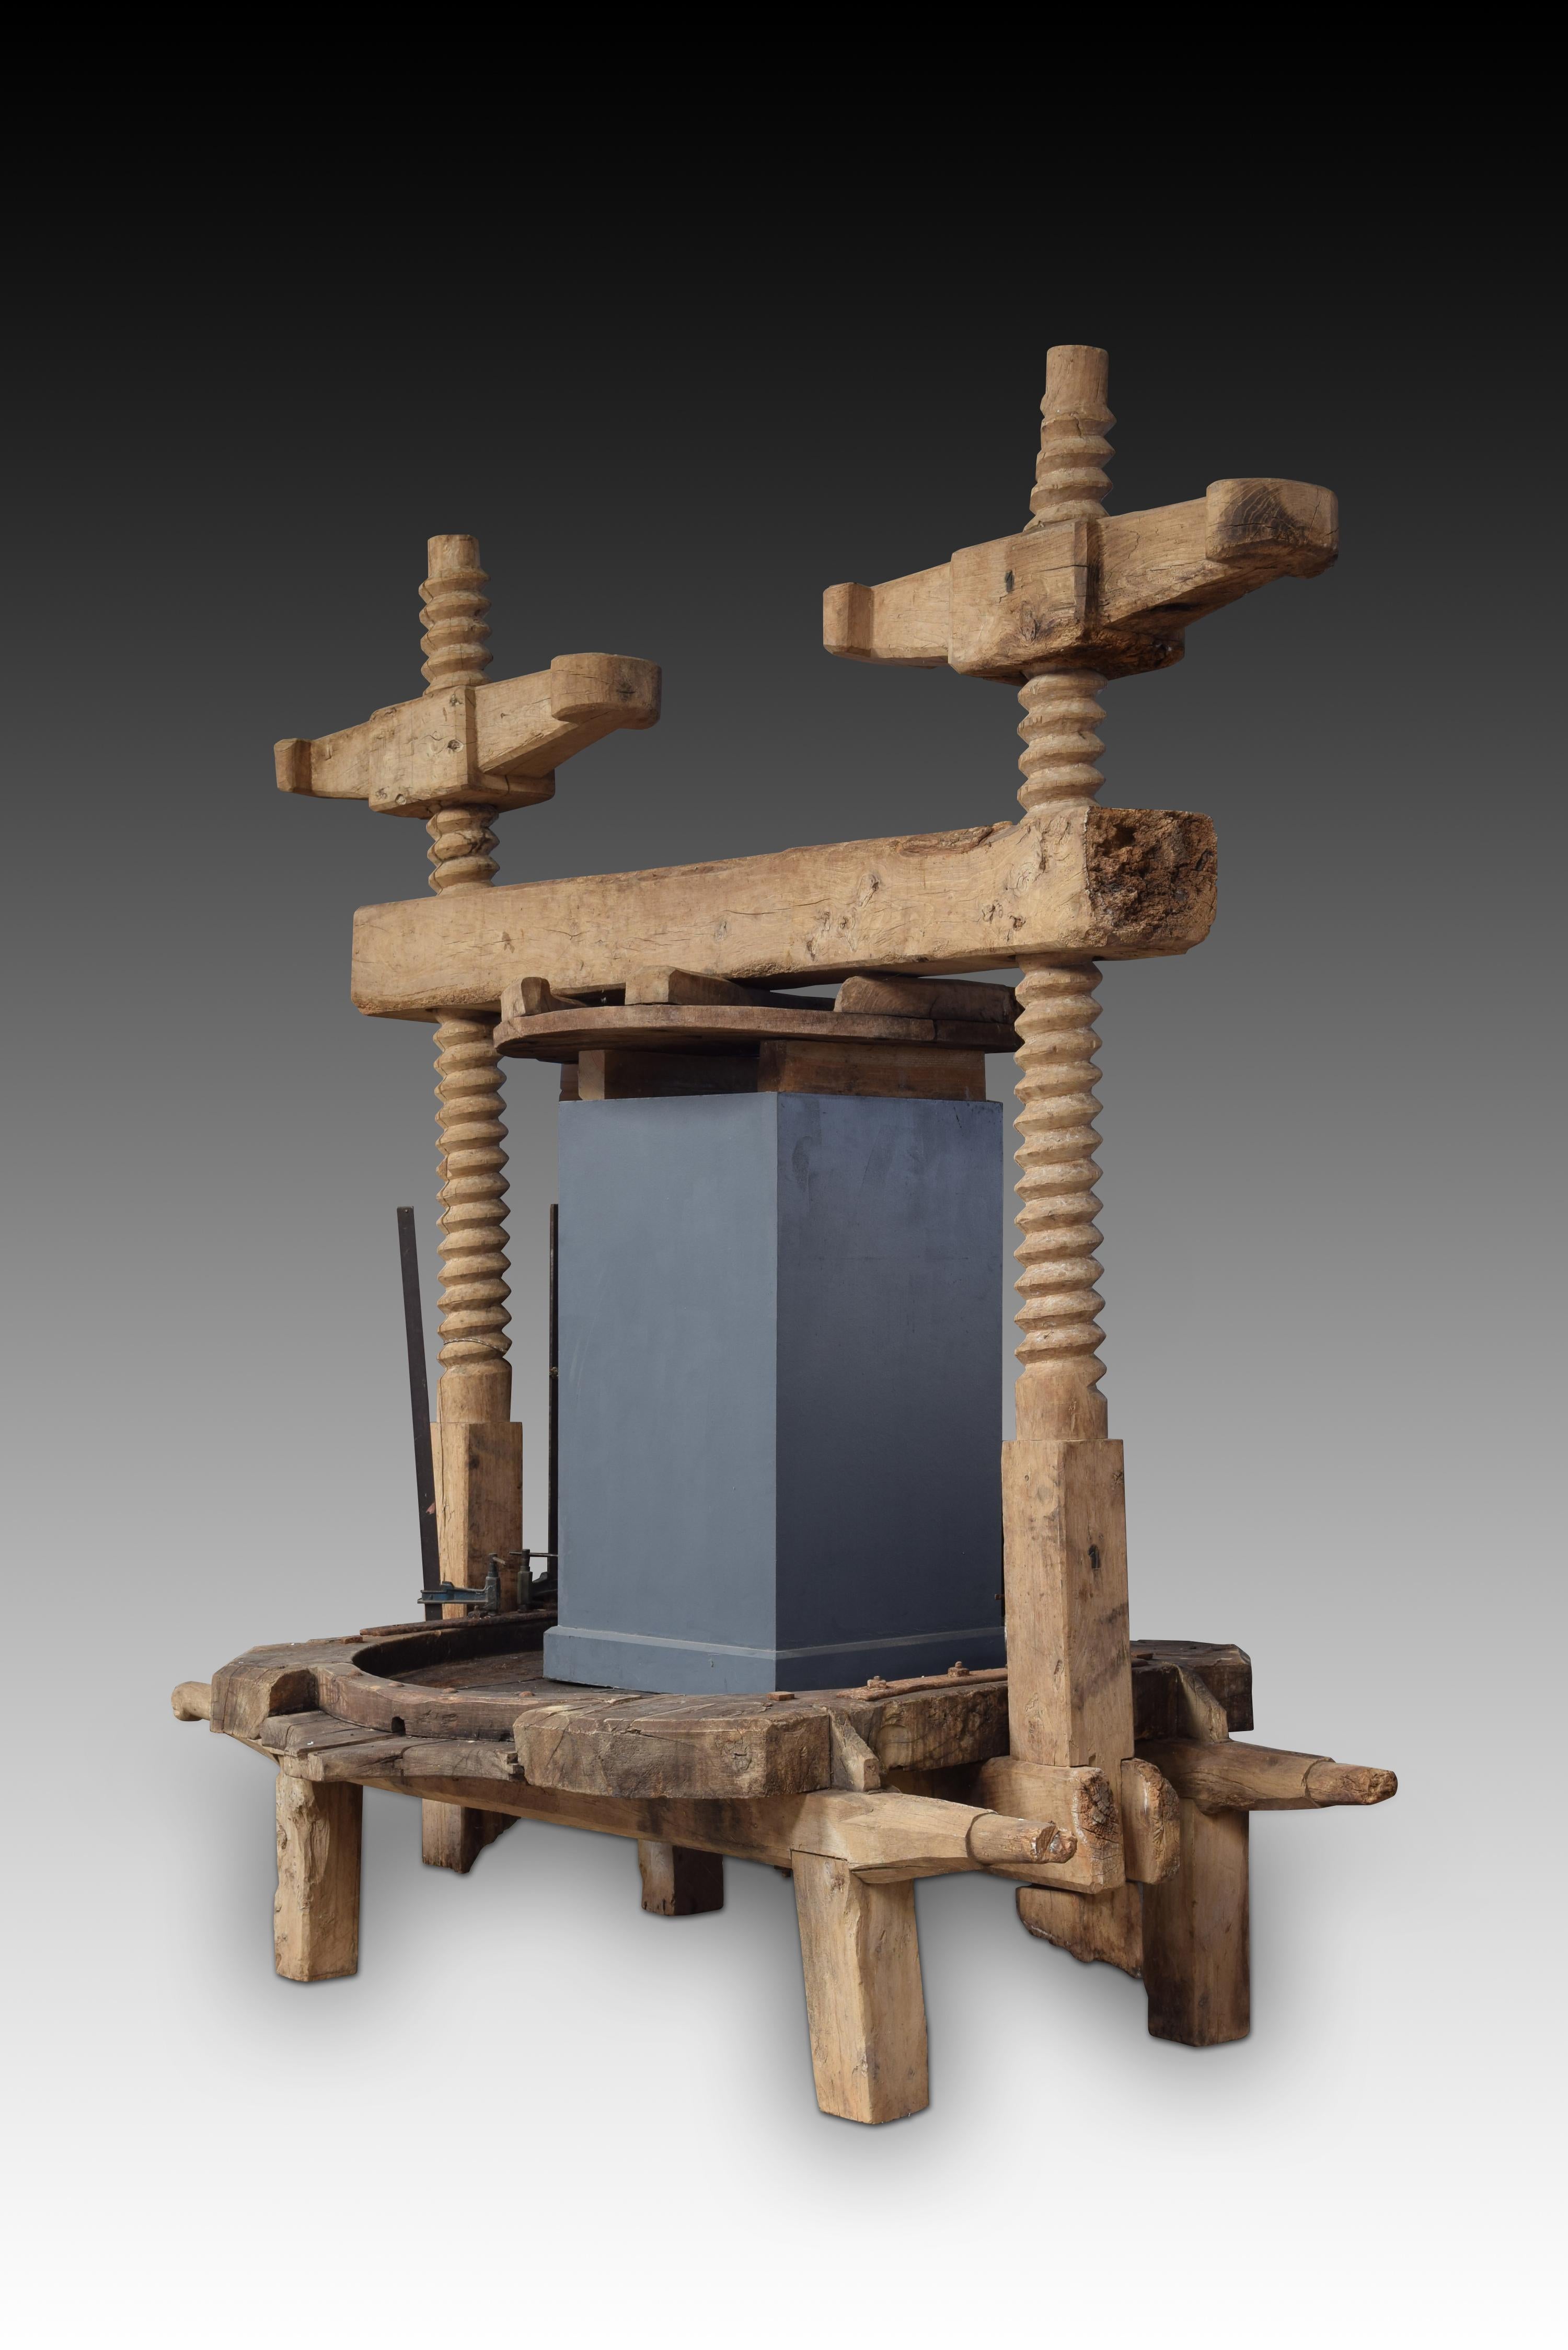 Wine press. Wood, metal. Spain, around 1800. 
Press to extract the juice from the grapes made of wood with two screws on the sides to manually move the plant part of the press located above, which also has a piece to fit into a container where to